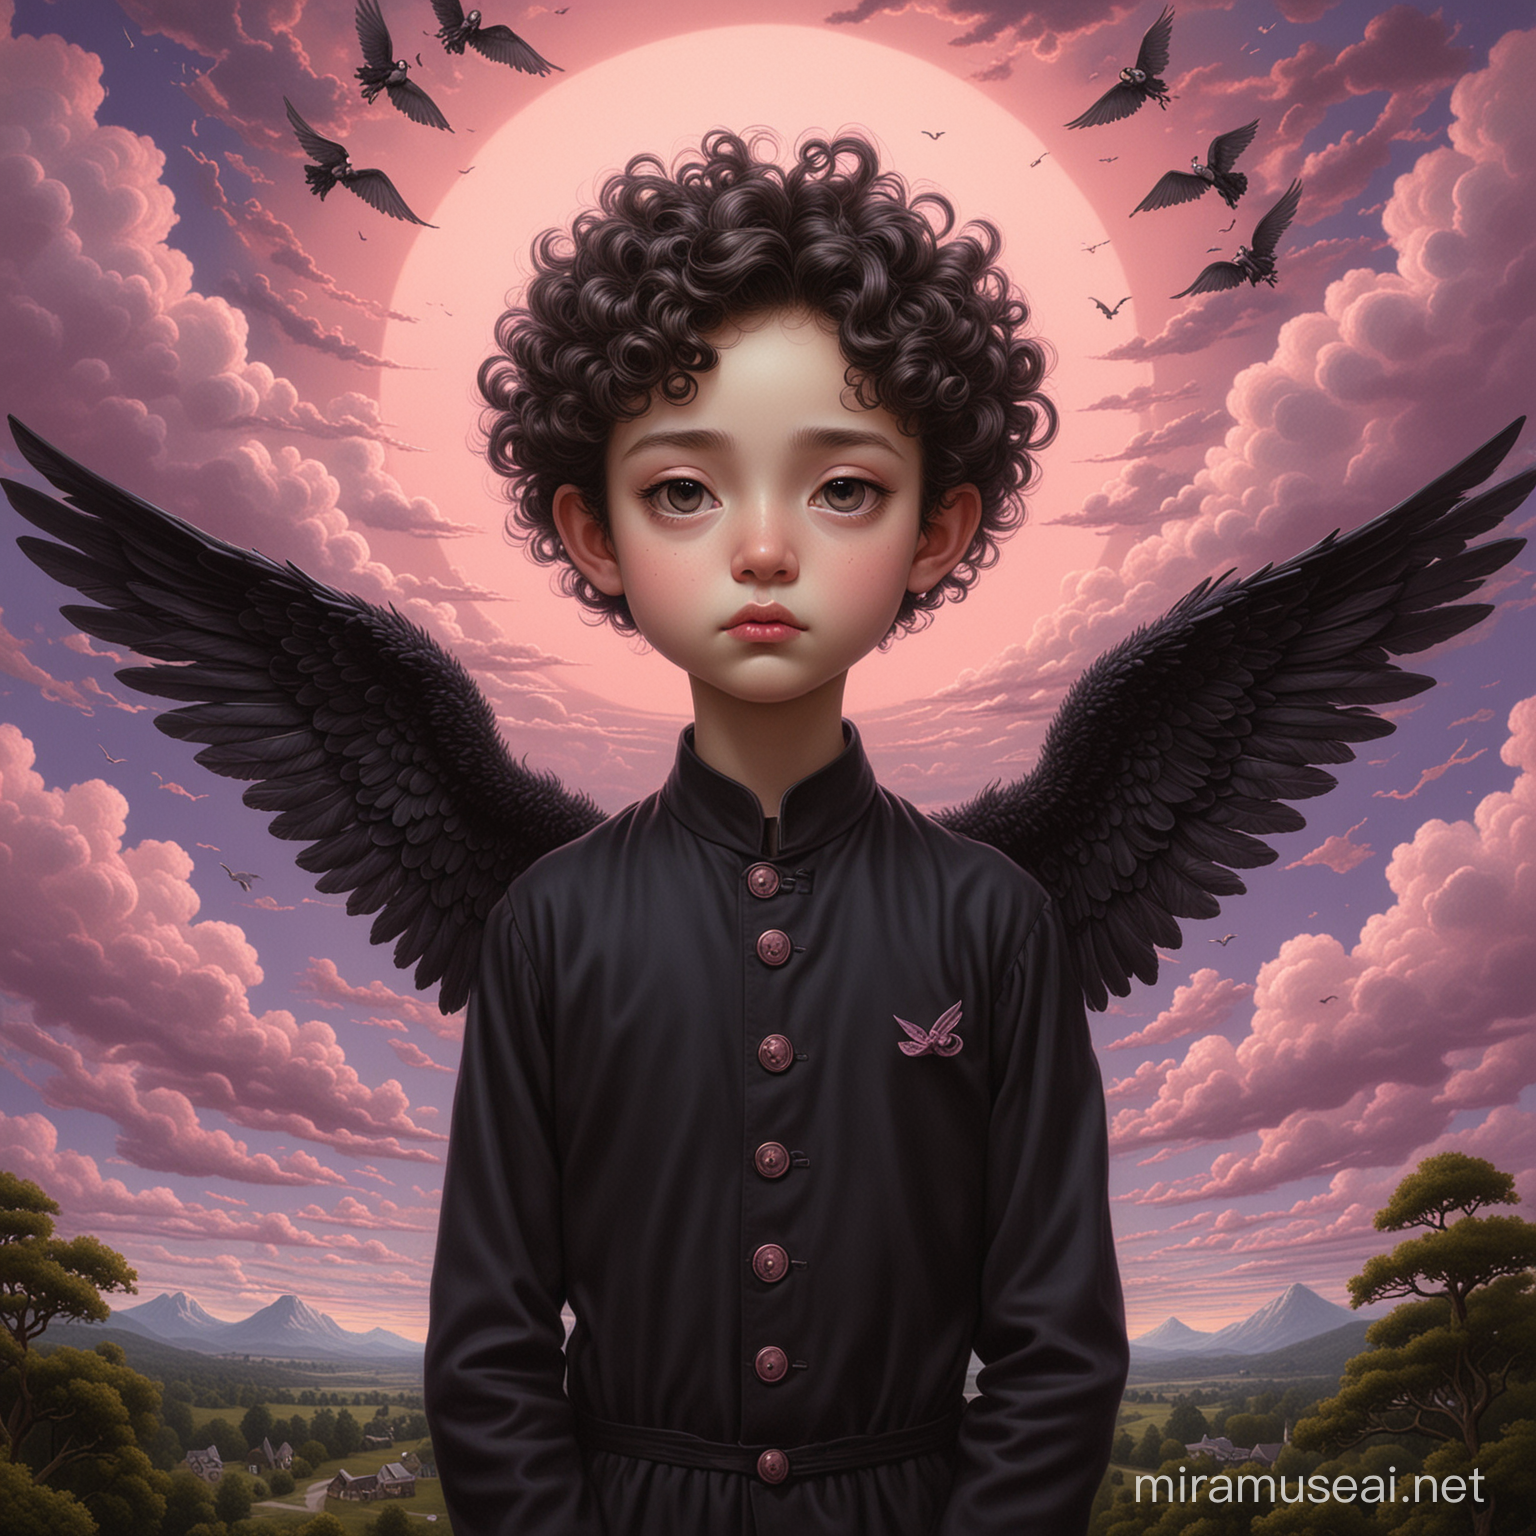 CurlyHaired Young Man with Black Wings in Mark Ryden Style Surreal Landscape